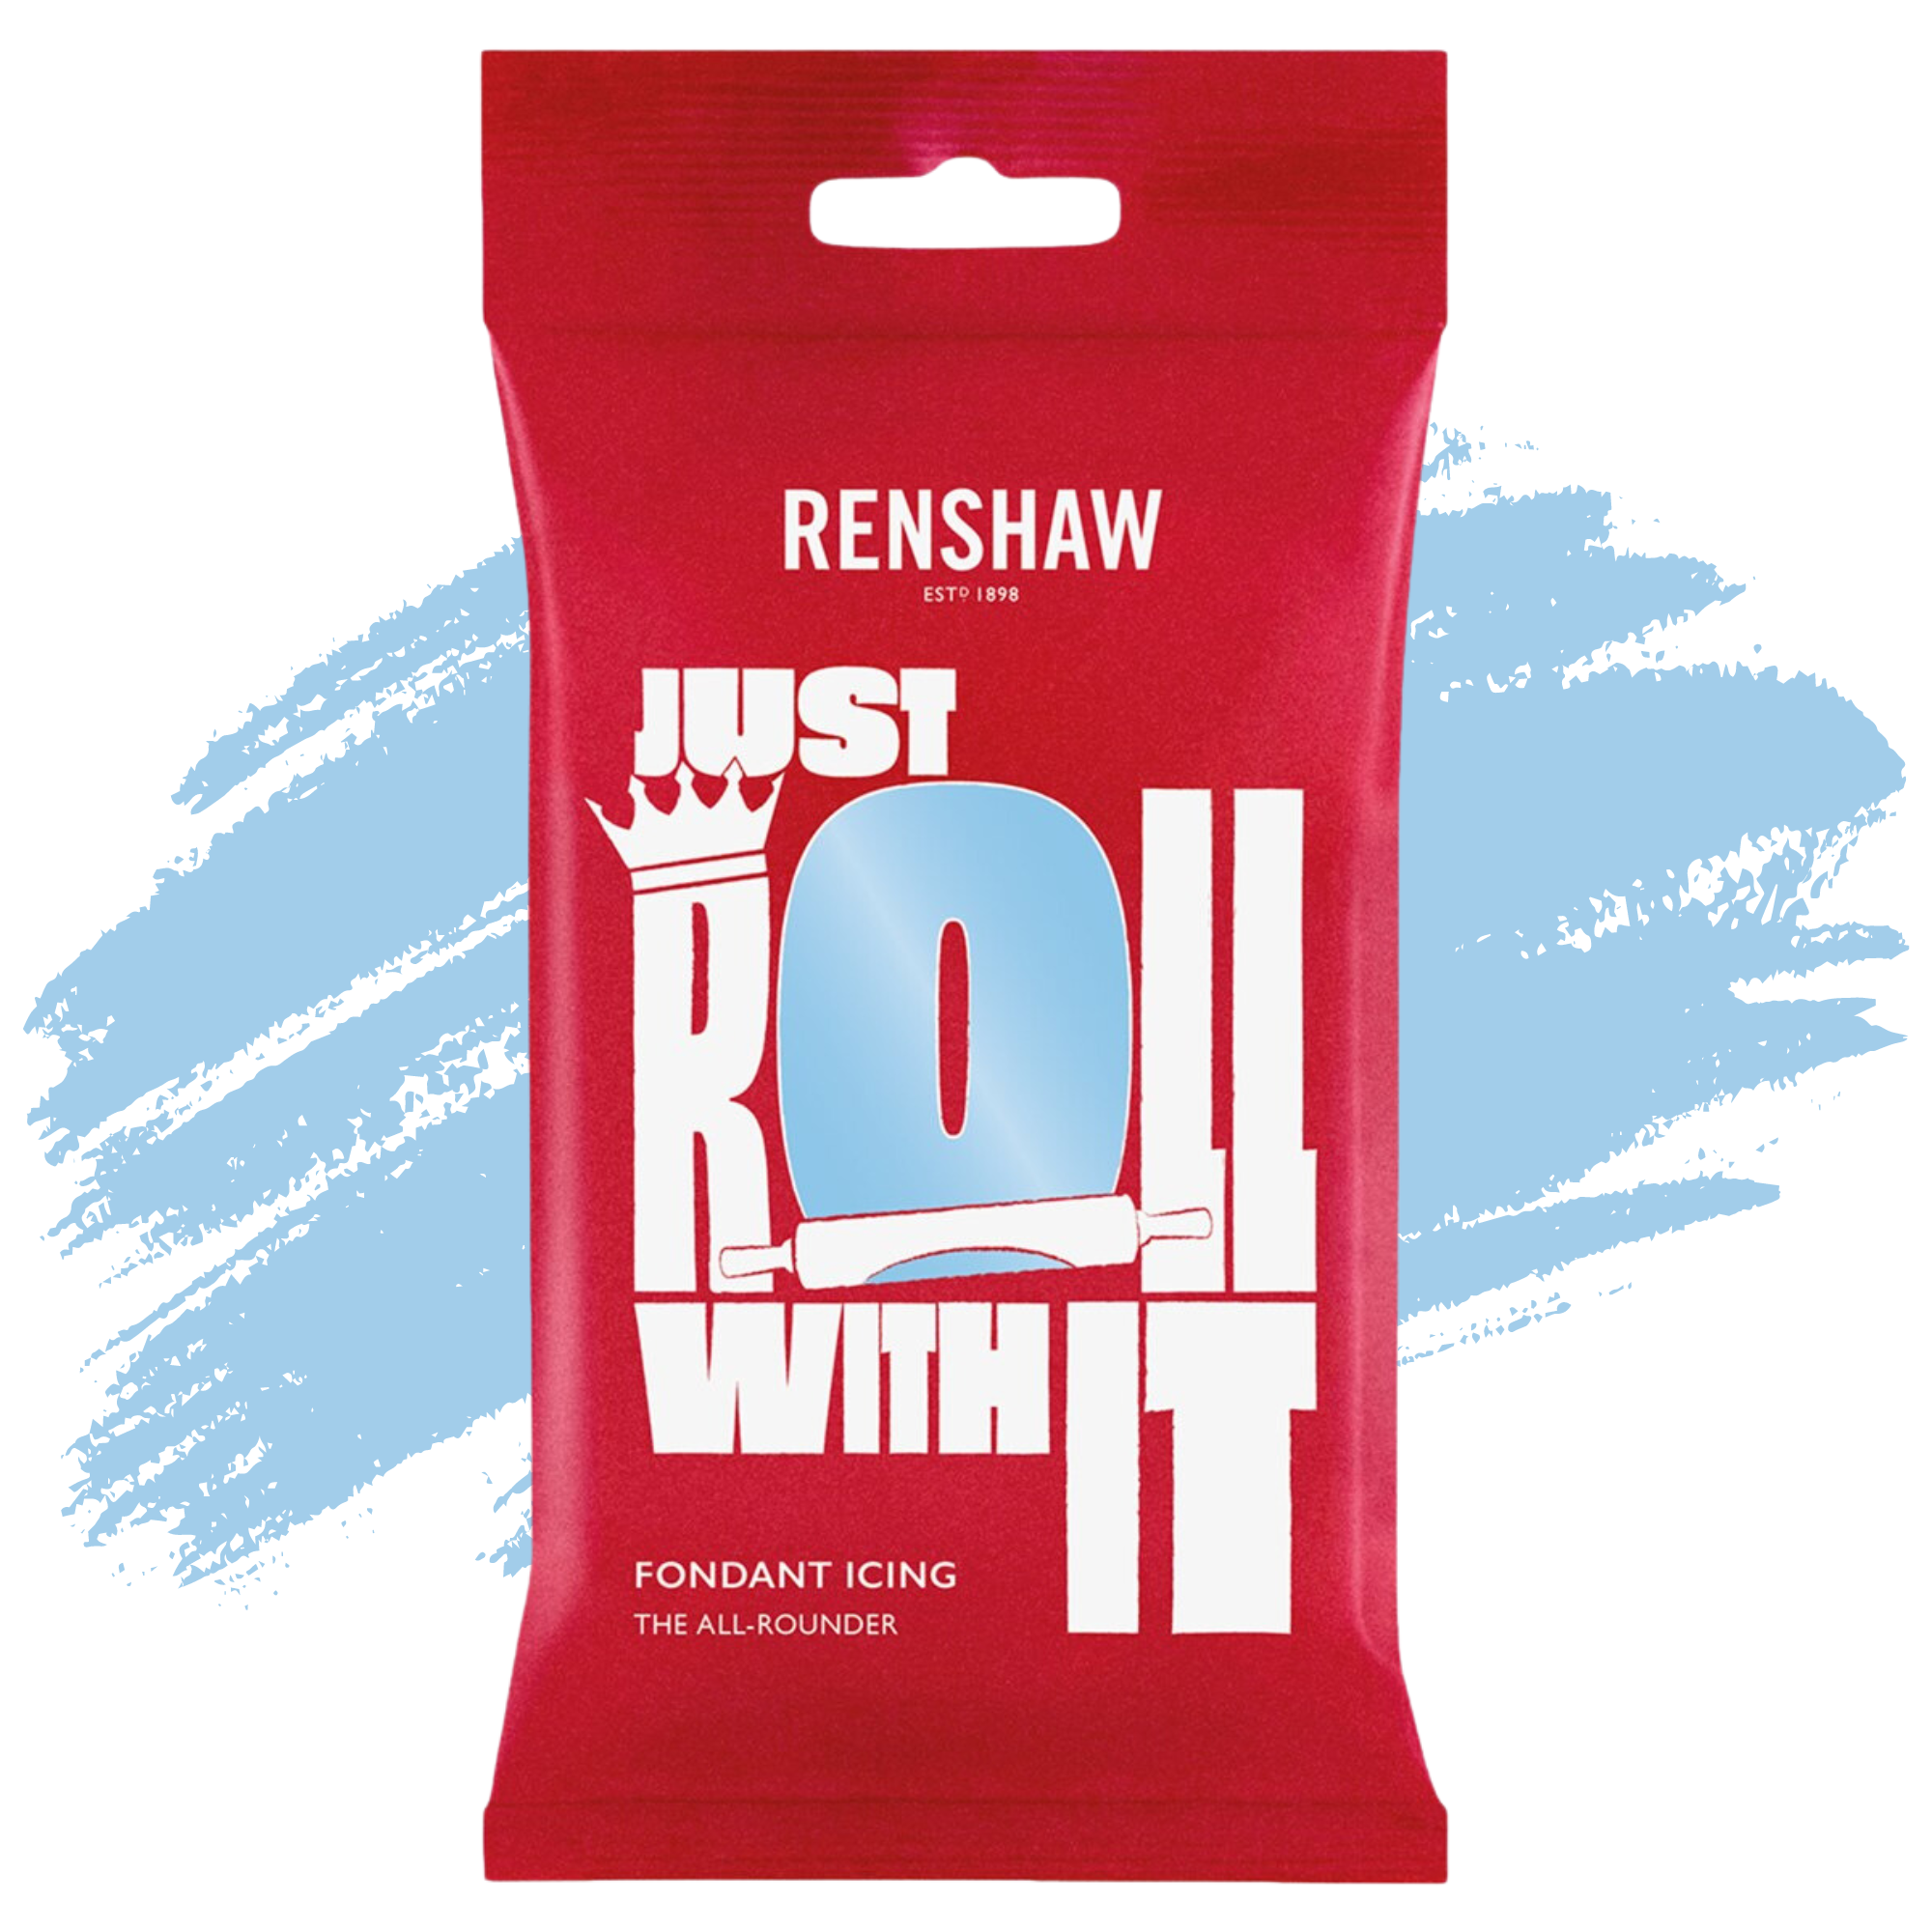 Renshaw Professional Sugar Paste Ready to Roll Fondant Just Roll with it Icing - Baby Blue - 250g